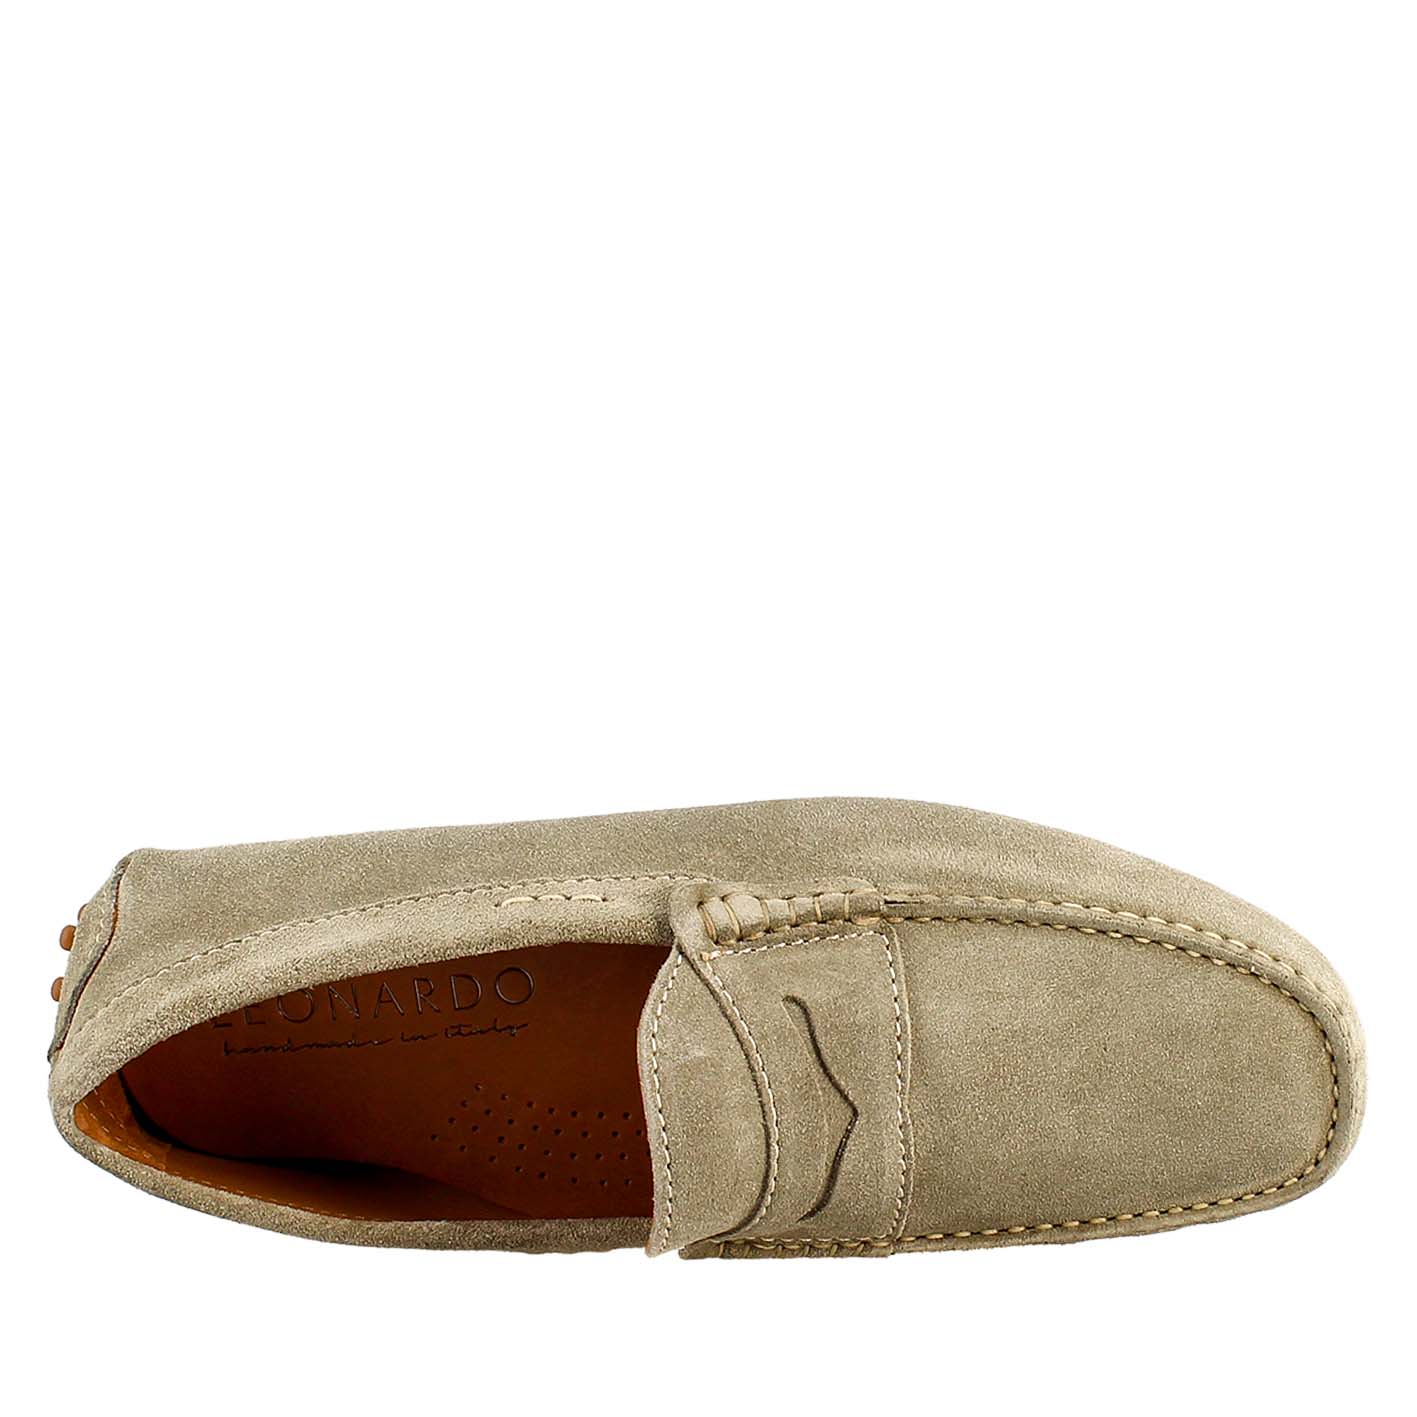 Men's gray lined loafer in suede